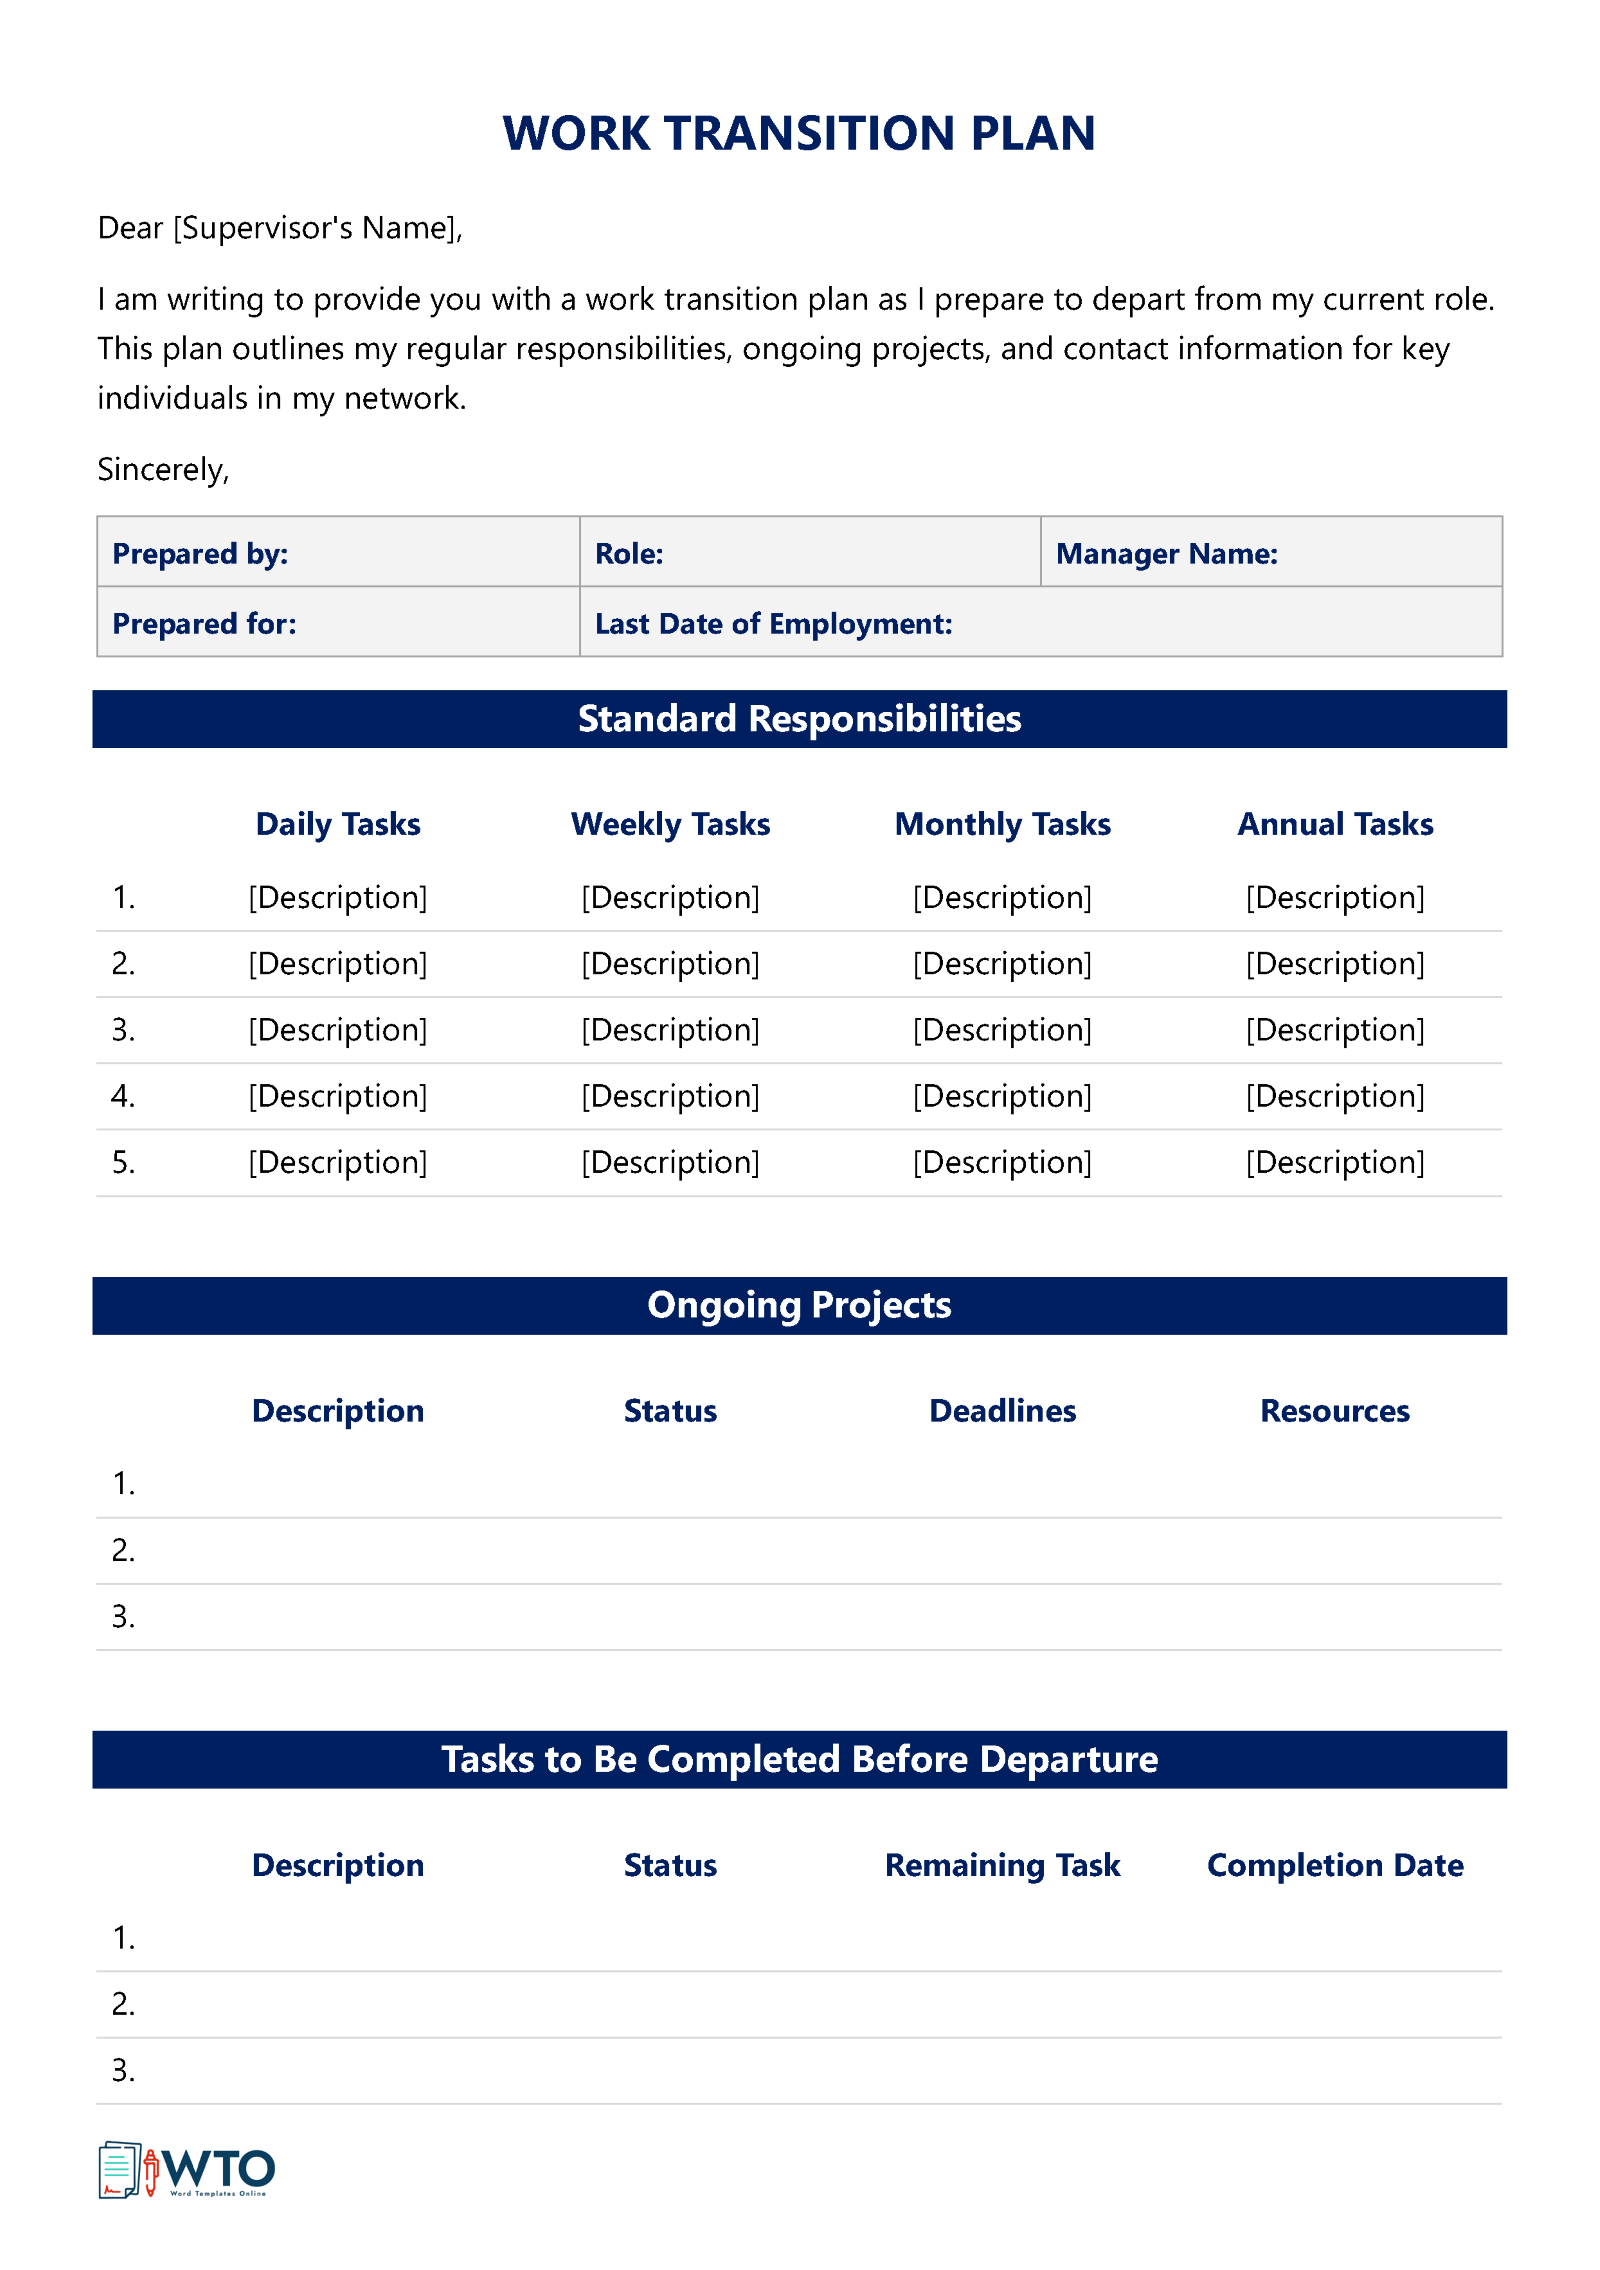 Work Transition Plan Template for Job Changes